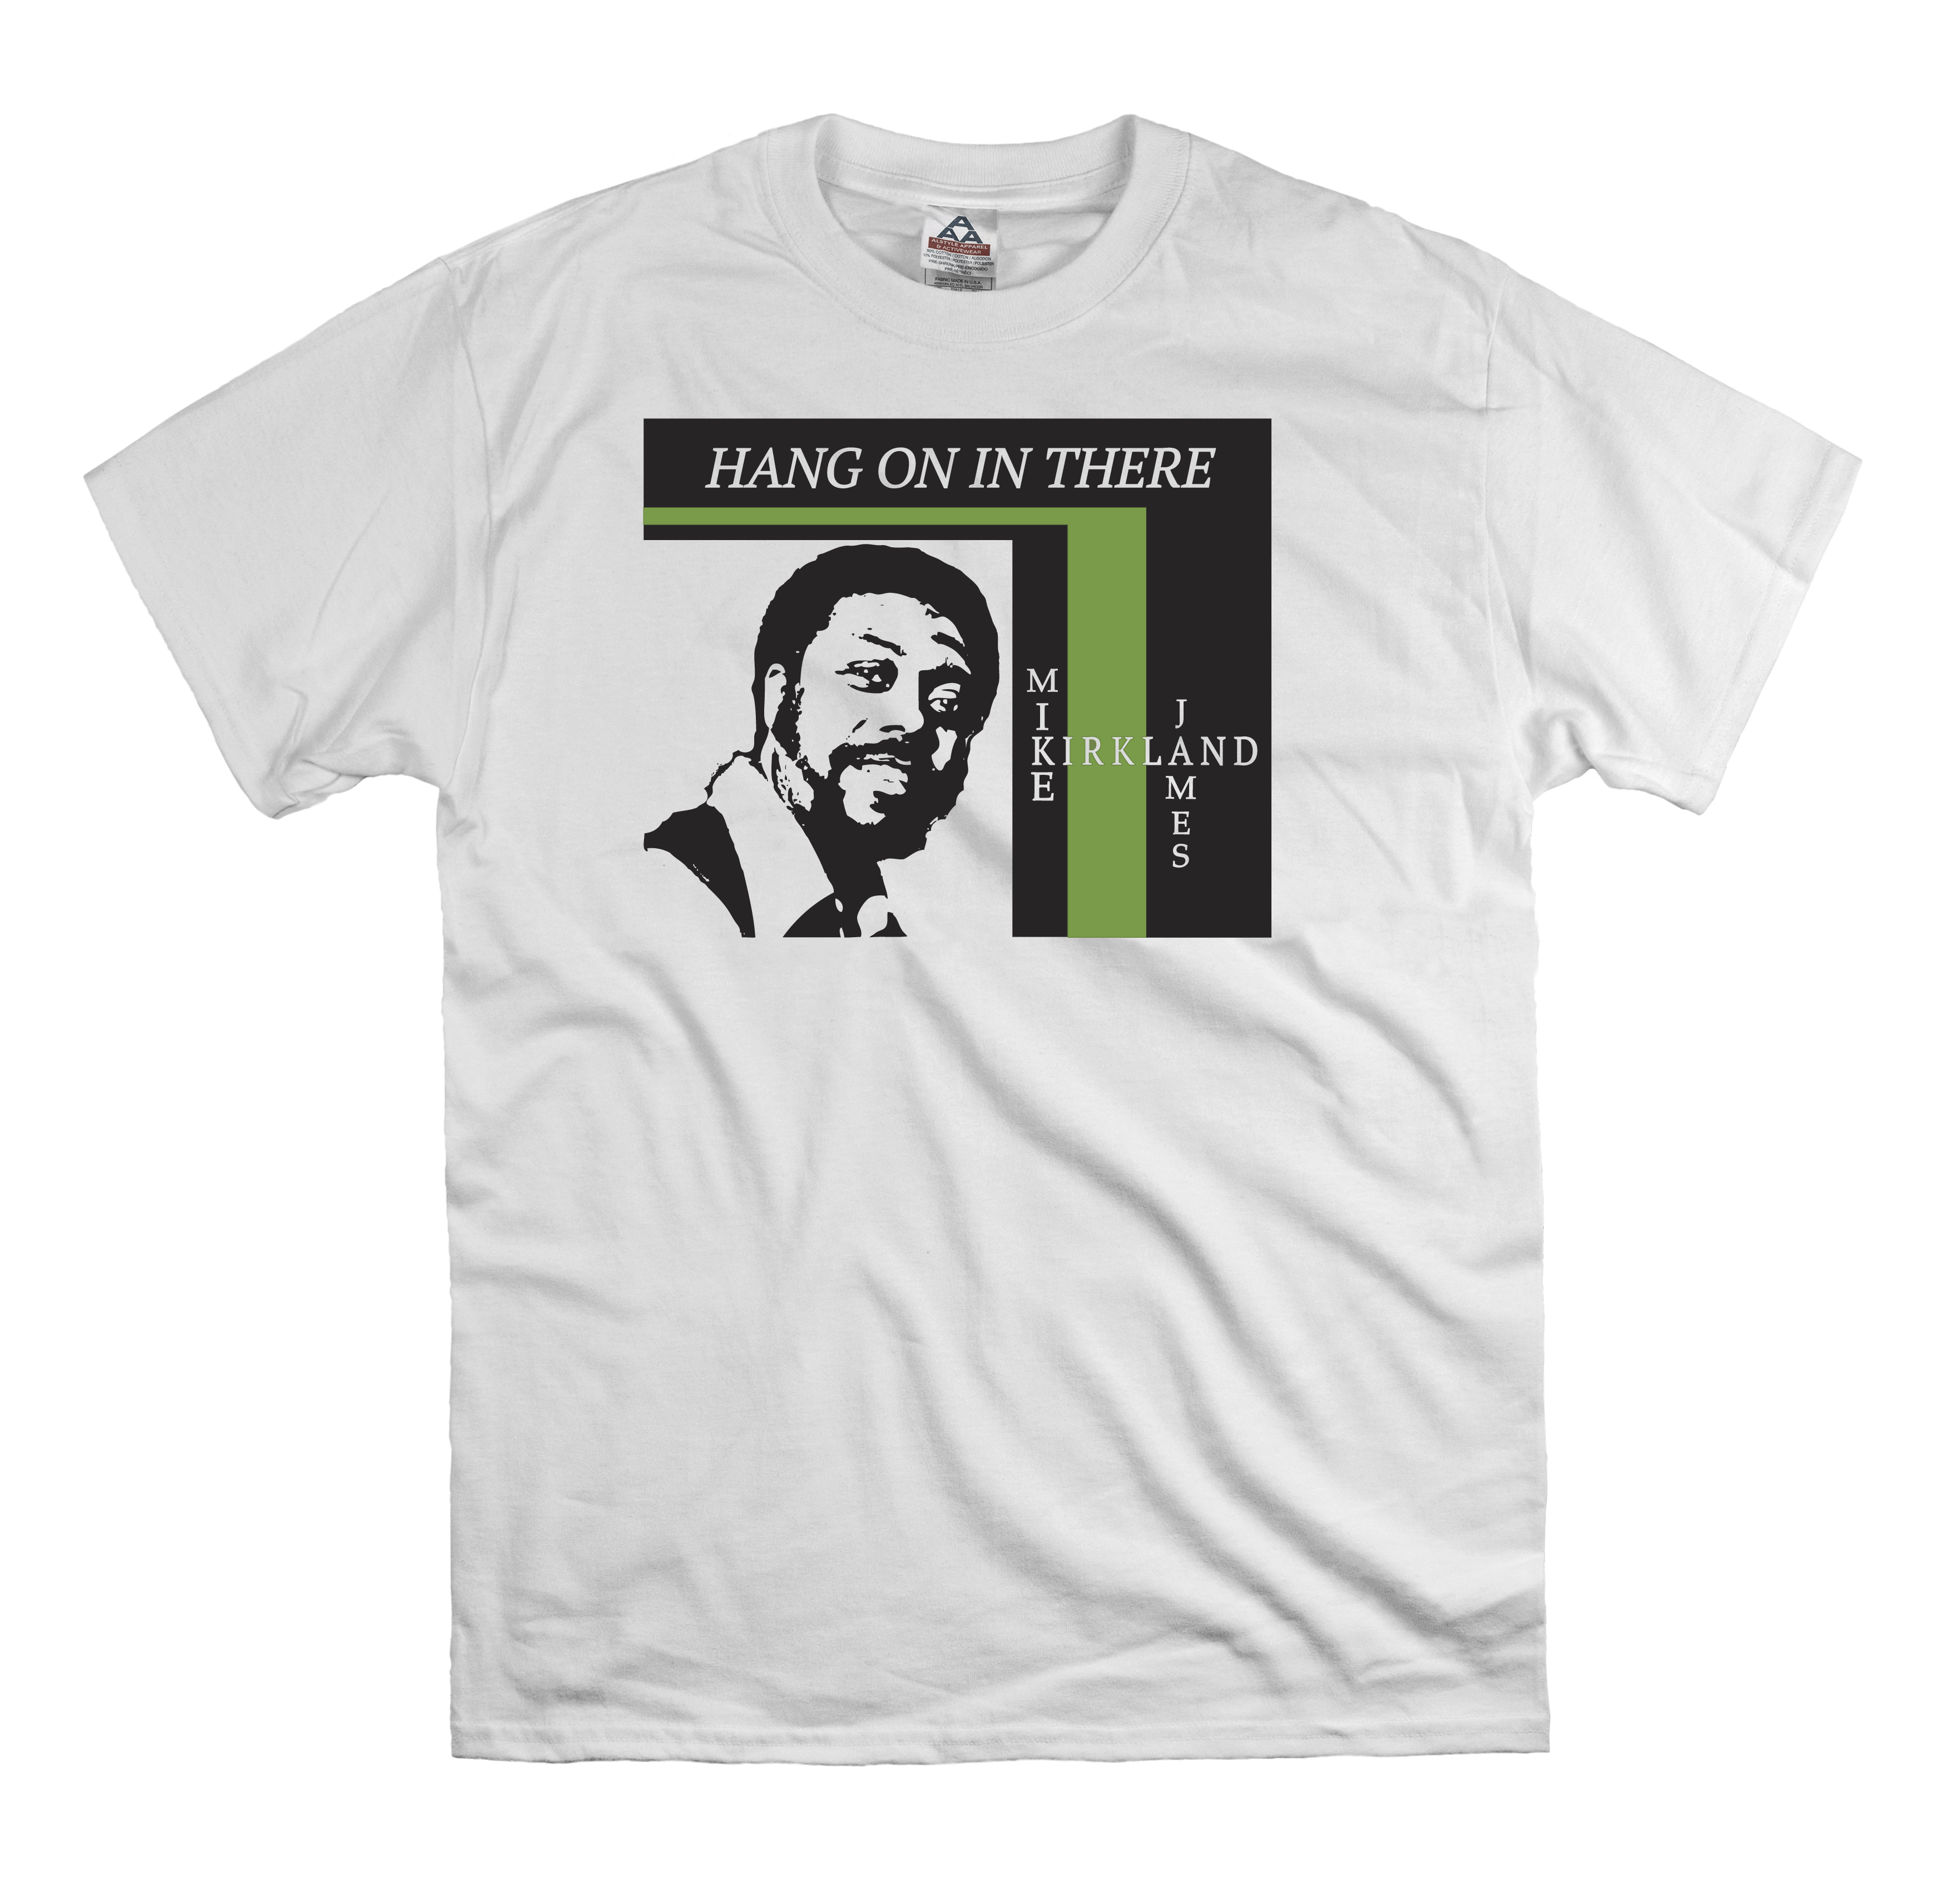 Mike James Kirkland T-shirt hang on in there